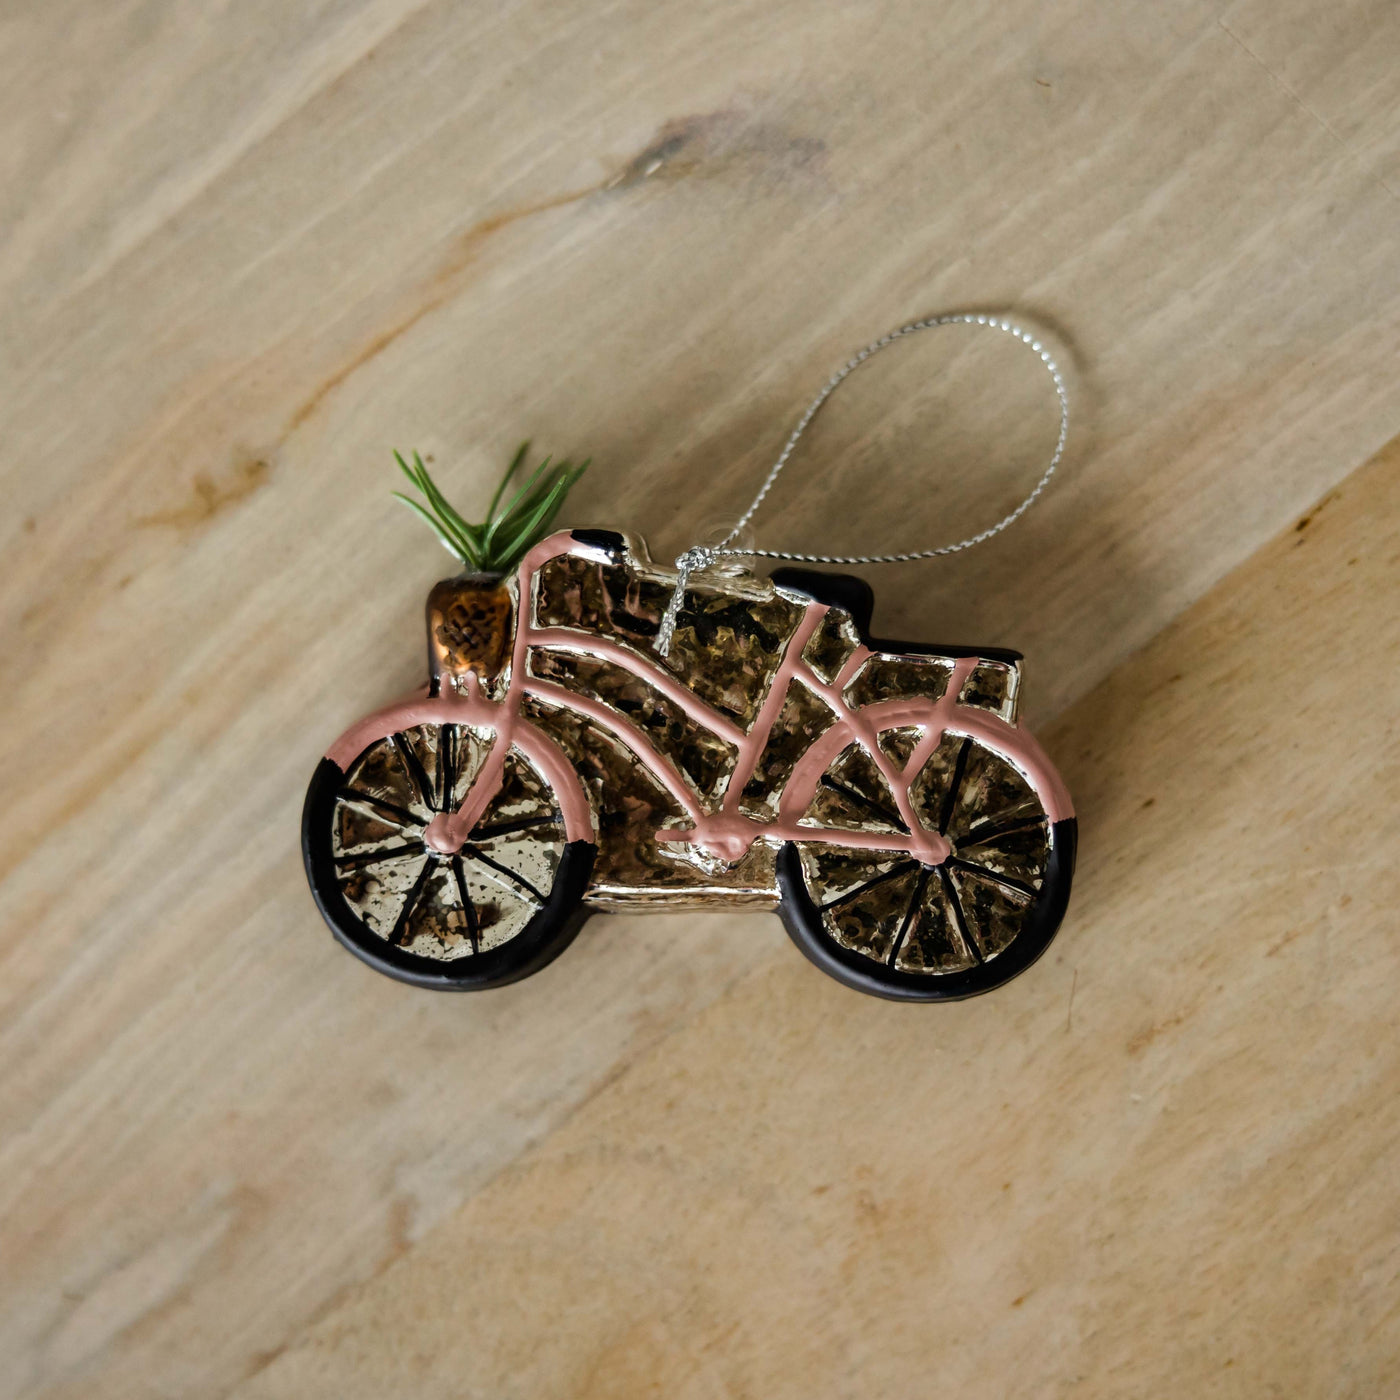 Hand Painted Bicycle Ornament | 2 Colors